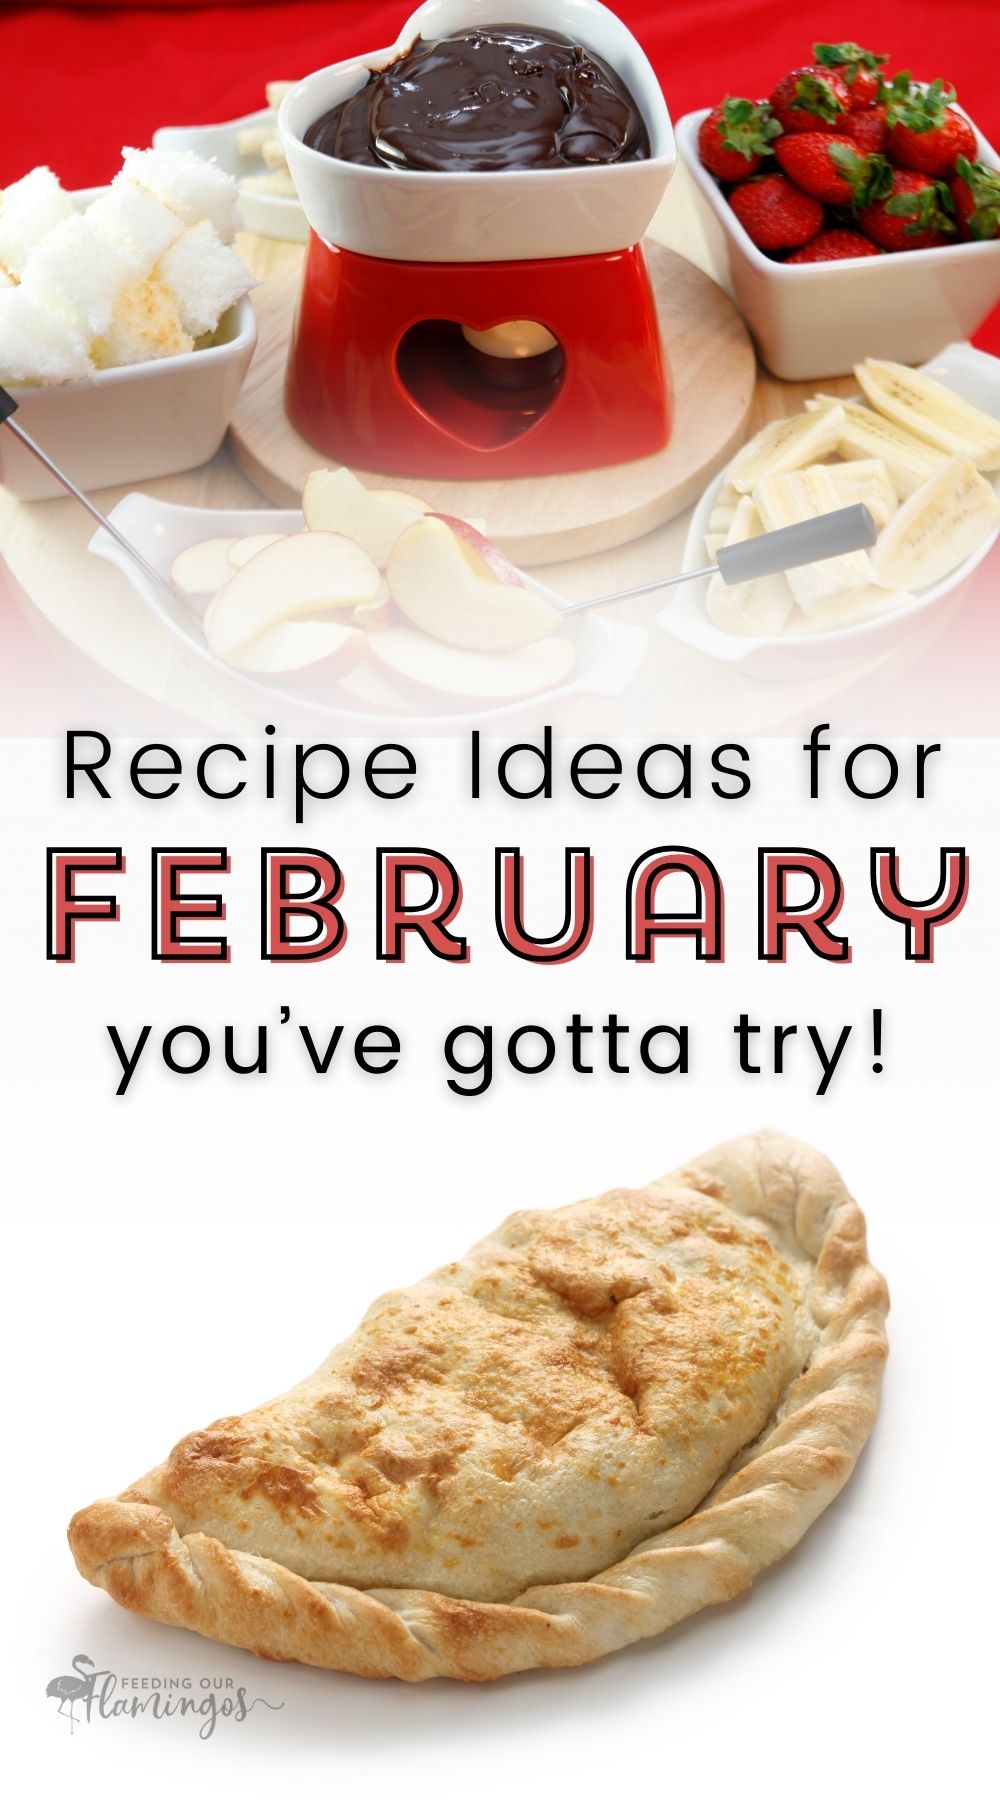 Keep your own list of favorite/must-try recipes for every month of the year. February is a great time to make some LOVEly food and throw a game day party with all the appetizers and finger foods your heart desires!